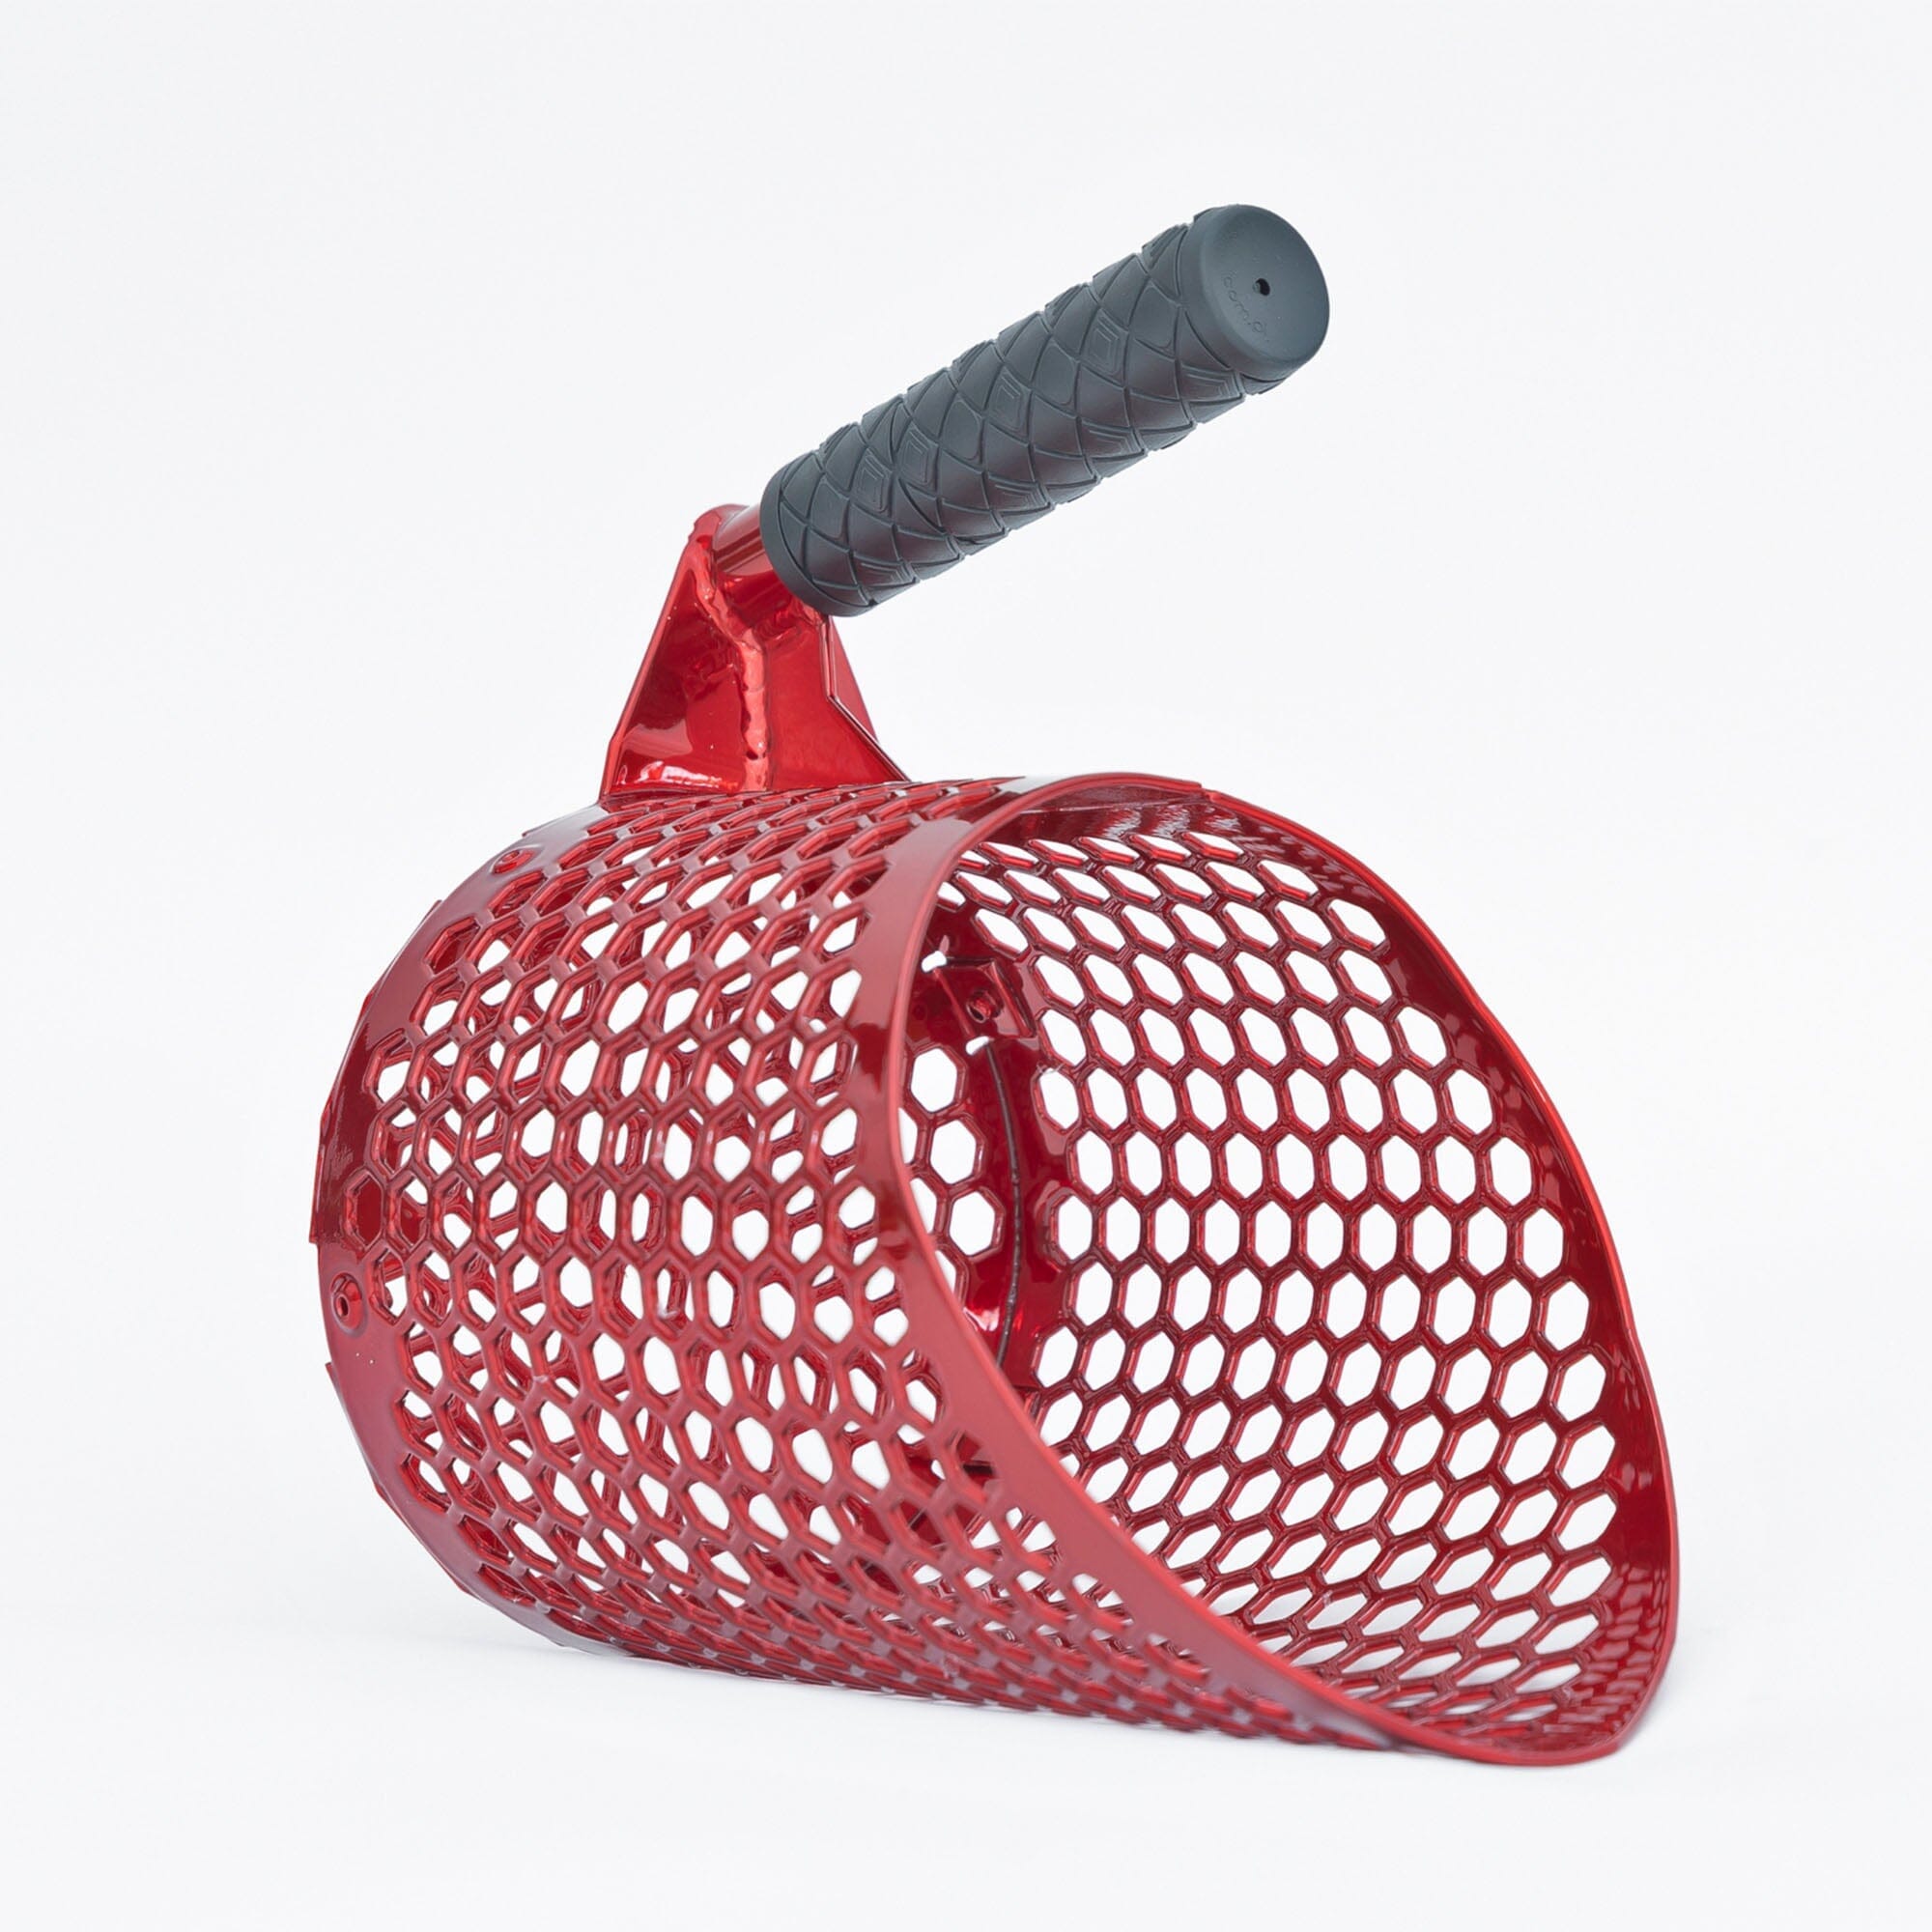 Salt or Sand Scoop – Corporate Facility Supply